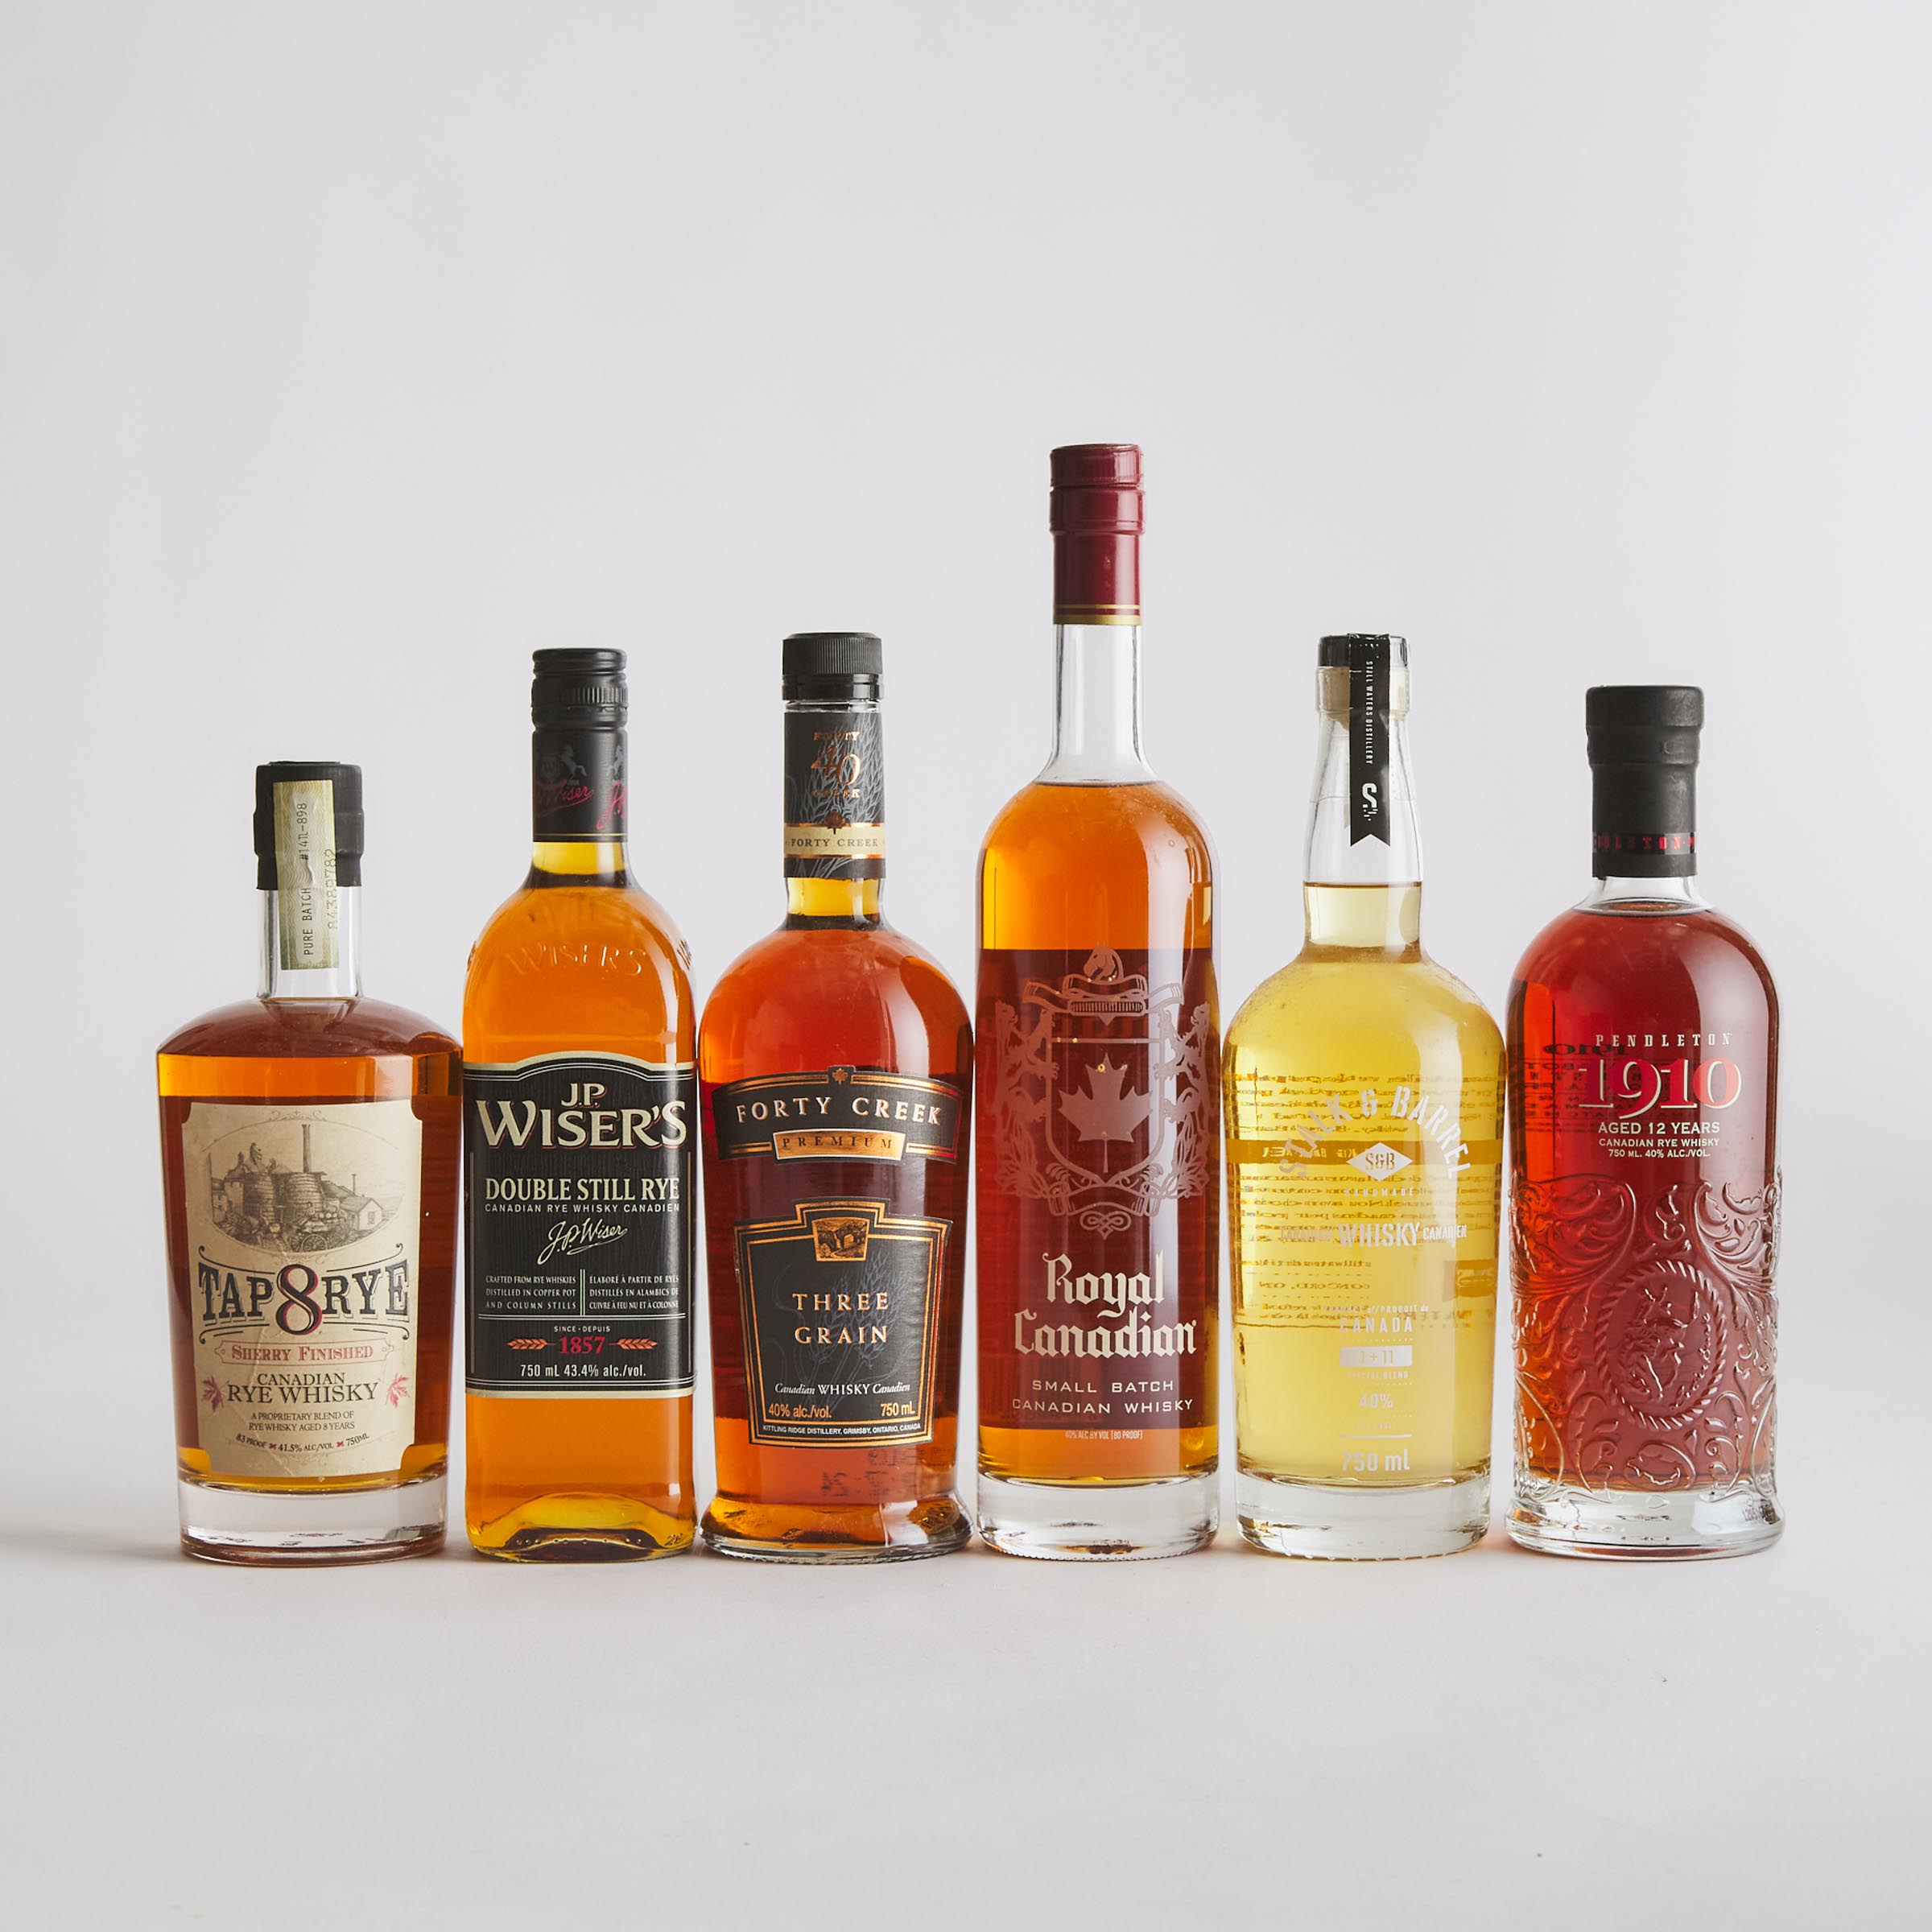 FORTY CREEK THREE GRAIN CANADIAN WHISKY NAS (ONE 750 ML)
J.P. WISER'S DOUBLE STILL RYE CANADIAN WHISKY (ONE 750 ML)
PENDLETON 1910 CANADIAN WHISKY 12 YEARS (ONE 750 ML)
ROYAL CANADIAN SMALL BATCH CANADIAN WHISKY (ONE 750 ML)
STALK AND BARREL CANADIAN WHISKY (ONE 750 ML)
TAP 8 CANADIAN RYE WHISKY 8 YEARS (ONE 750 ML)